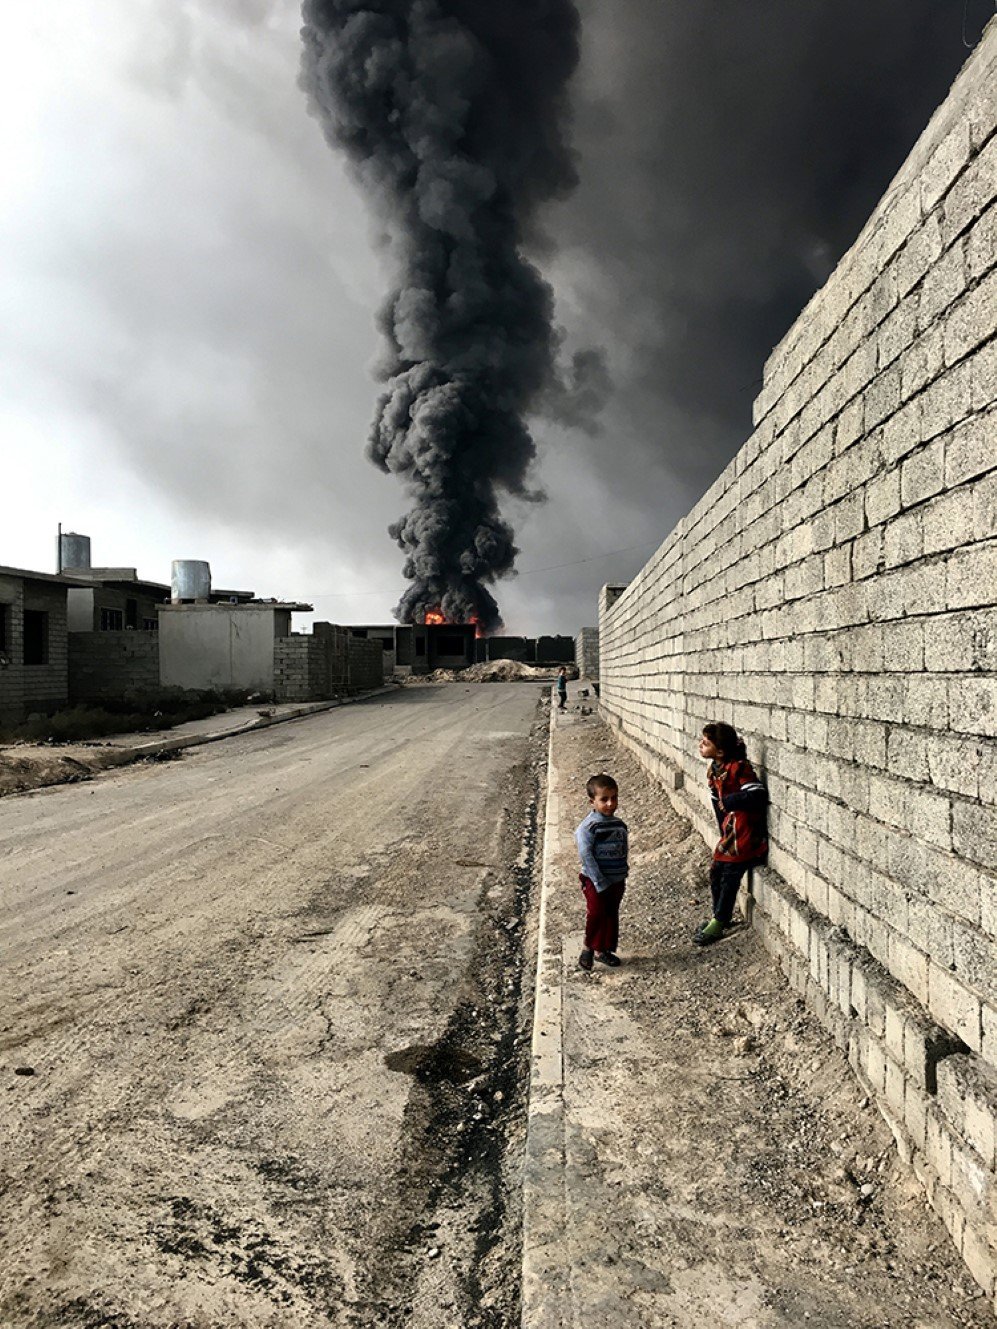 Children roam the streets in Qayyarah near the fire and smoke billowing from oil wells, set ablaze by ISIS militants.